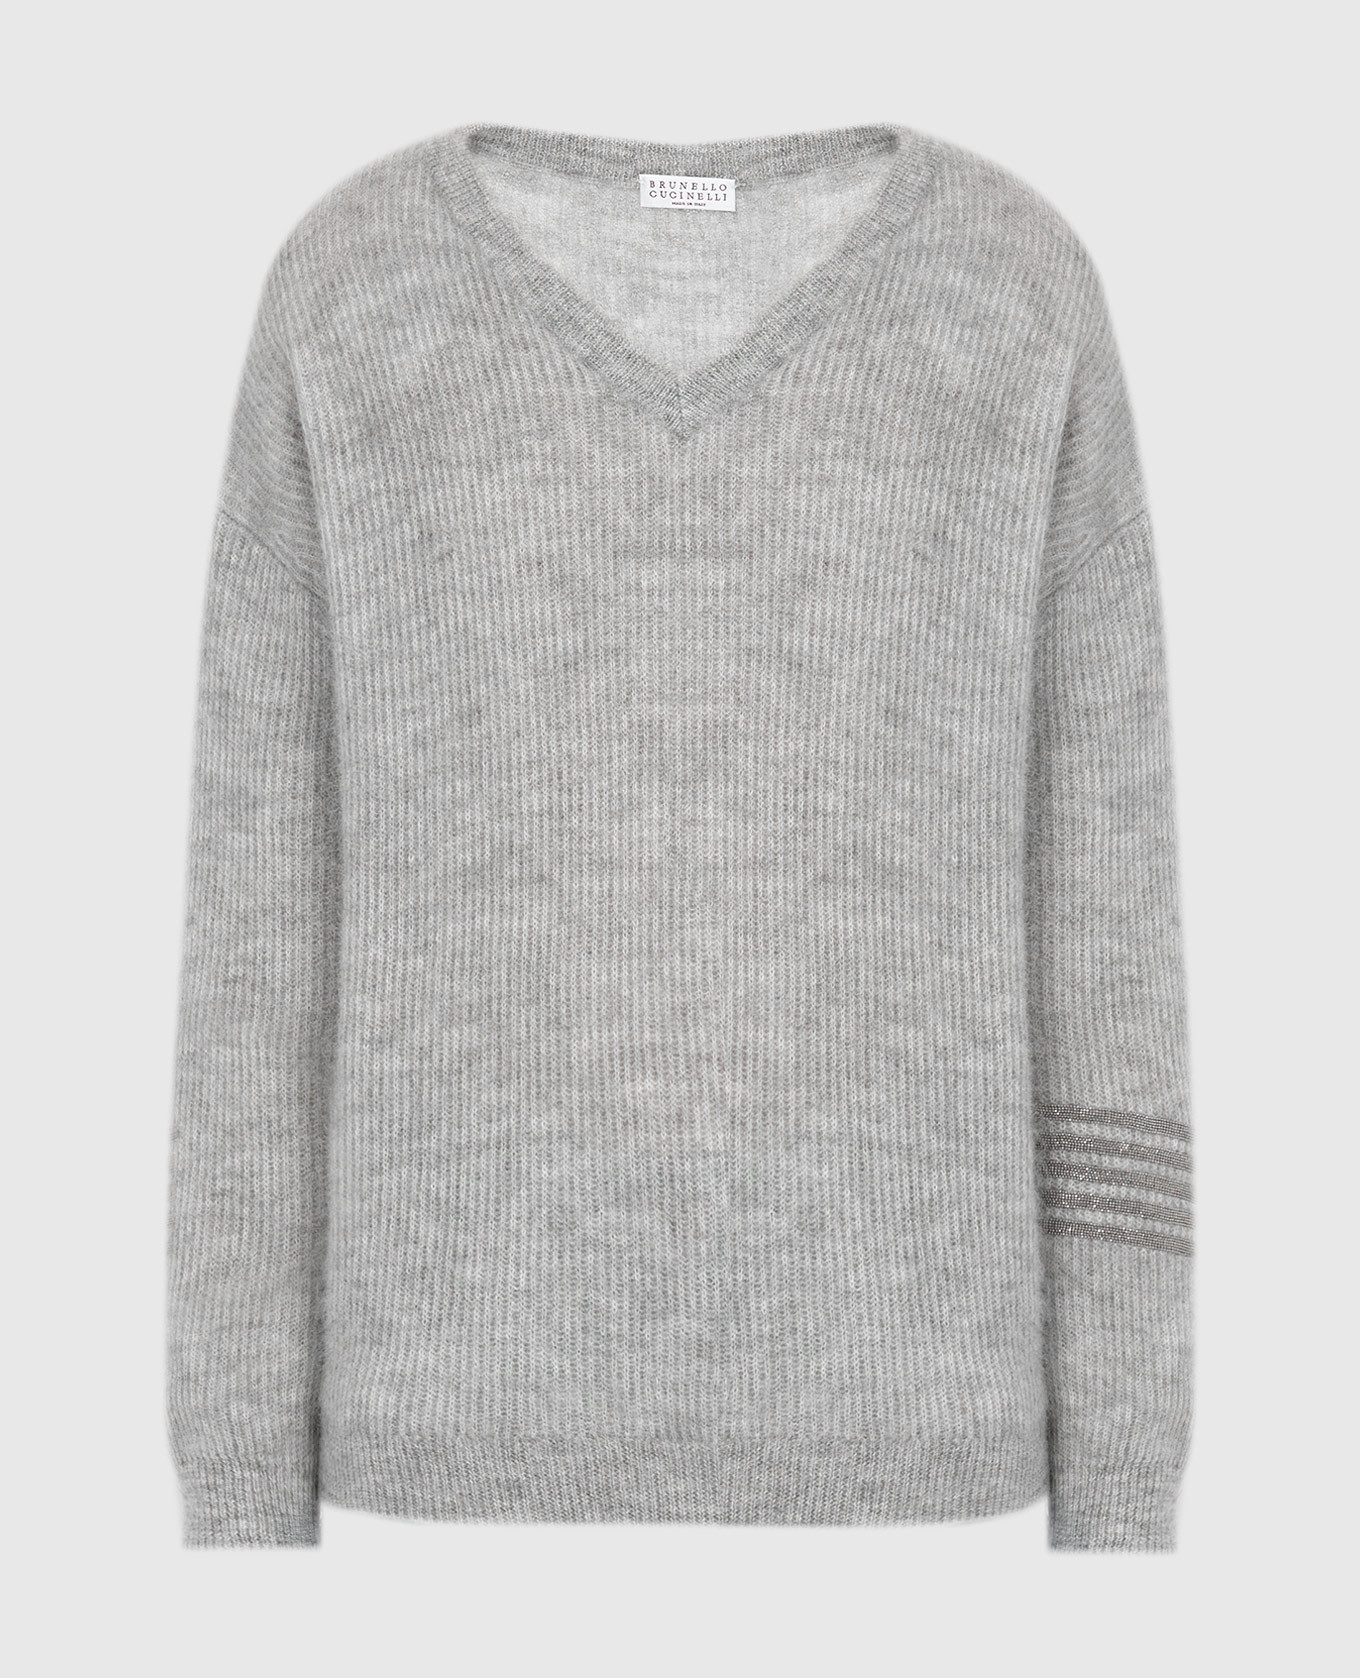 Gray pullover with chains